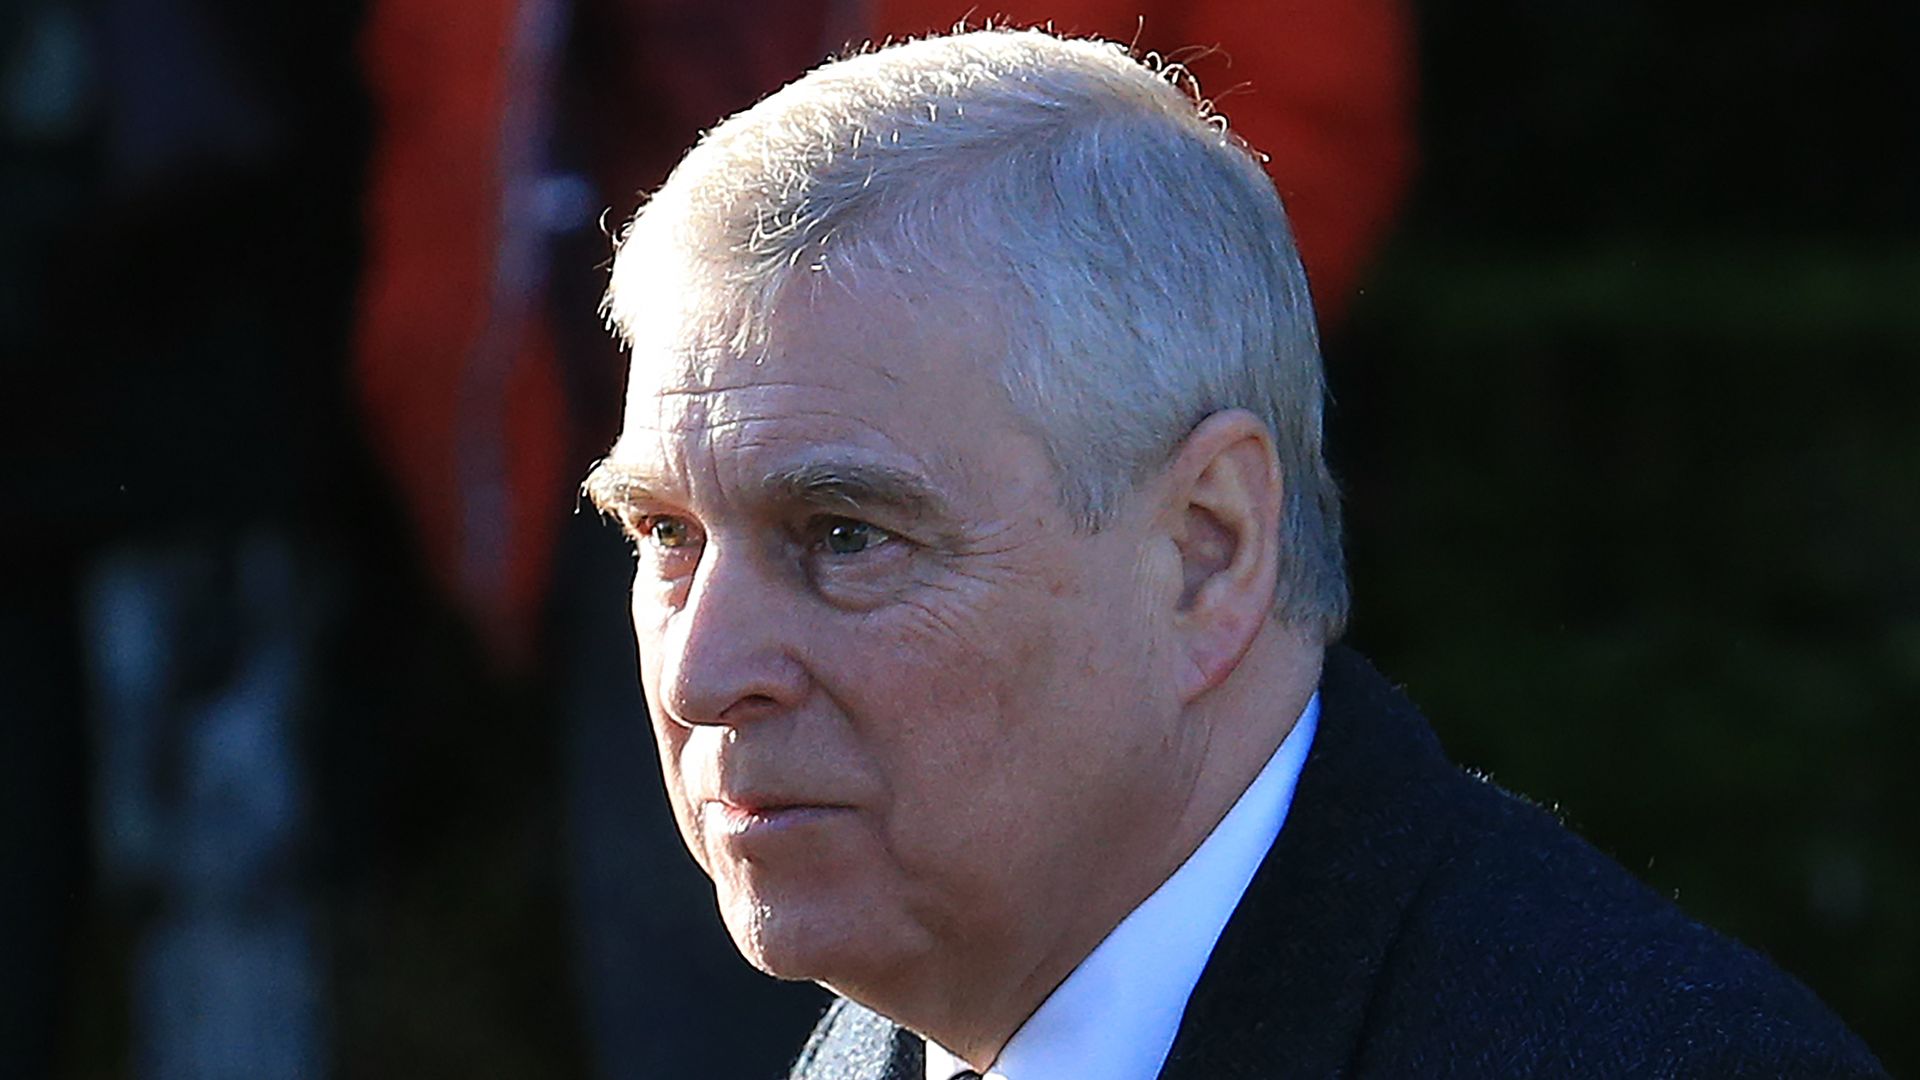 Britain's Prince Andrew, Duke of York, arrives to attend a church service at St Mary the Virgin Church in Hillington, Norfolk, eastern England, on January 19, 2020.